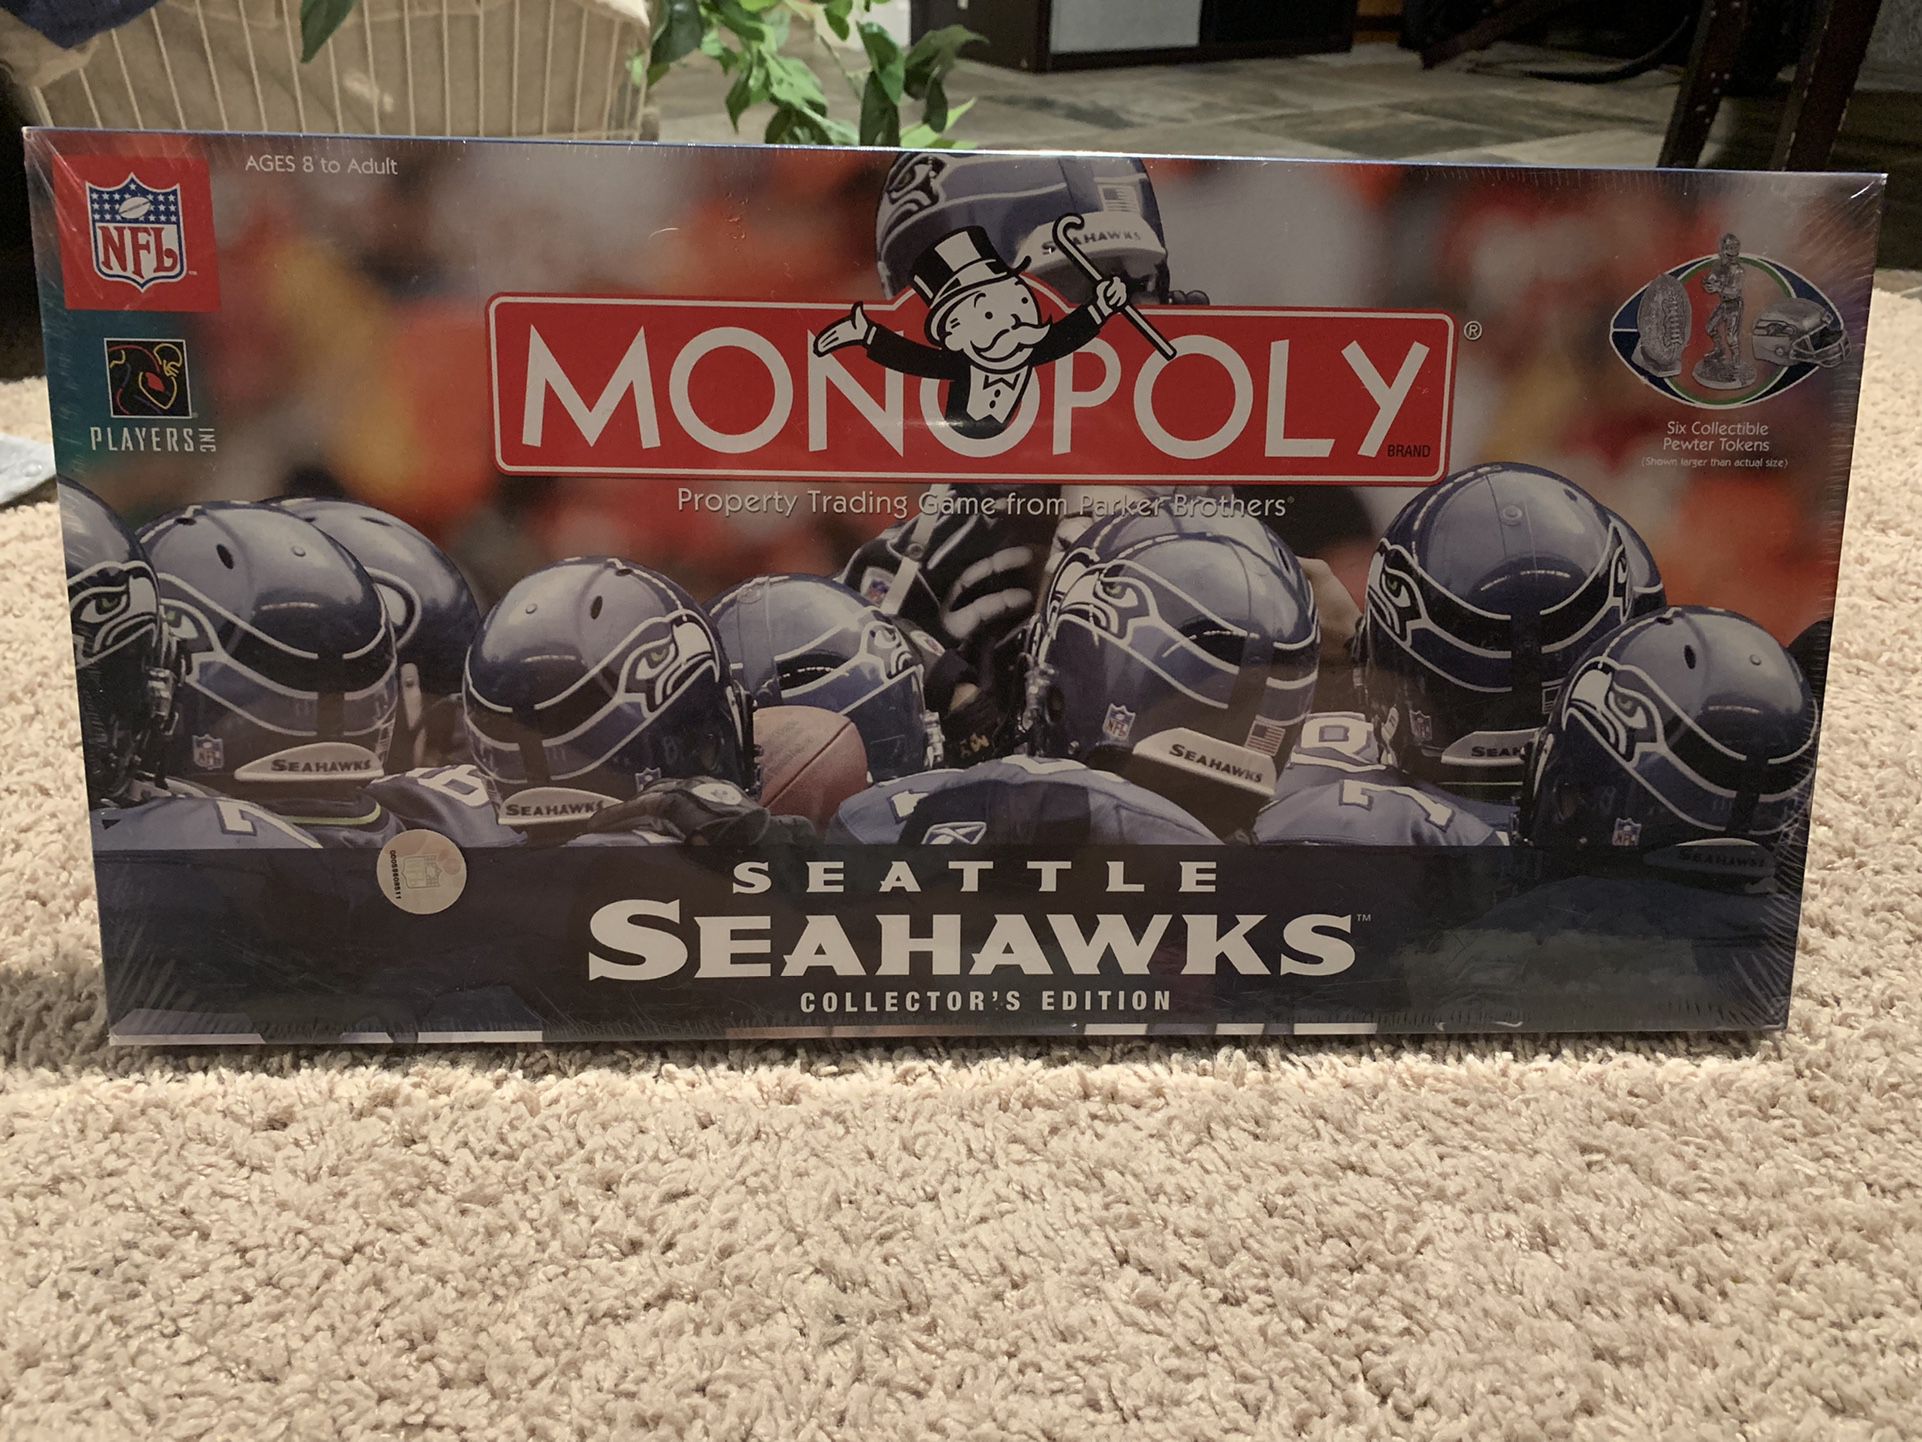 Monopoly Seattle Seahawks Collectors Edition Property Trading Board Game NFL